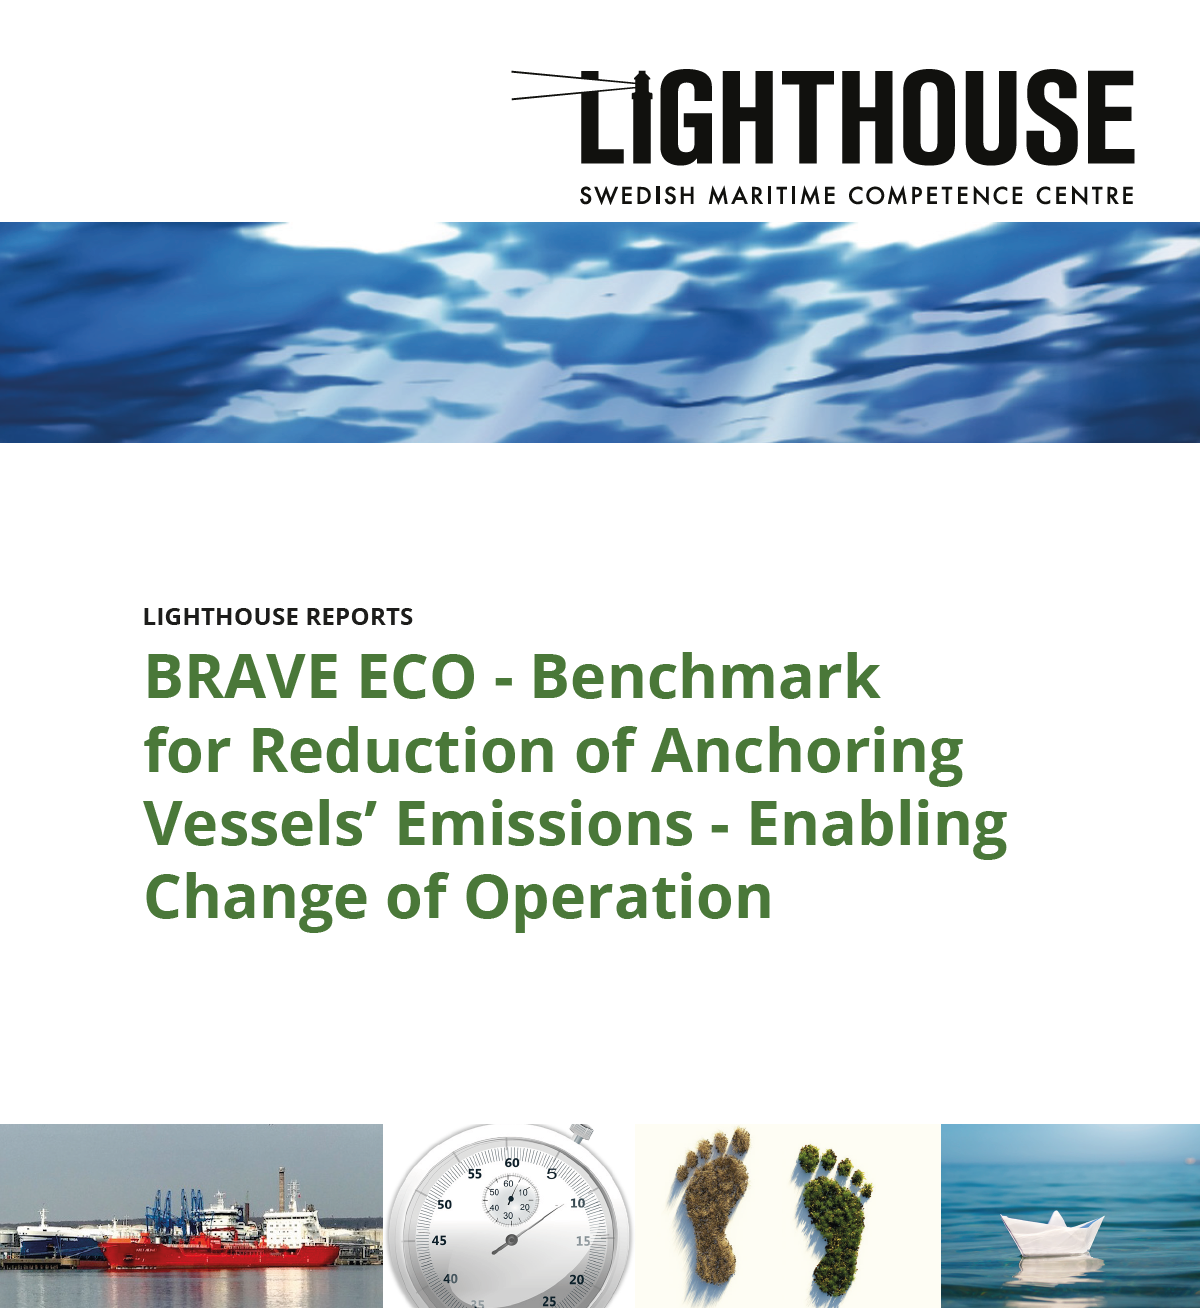 BRAVE ECO - Benchmark for Reduction of Anchoring Vessels’ Emissions - Enabling Change of Operation